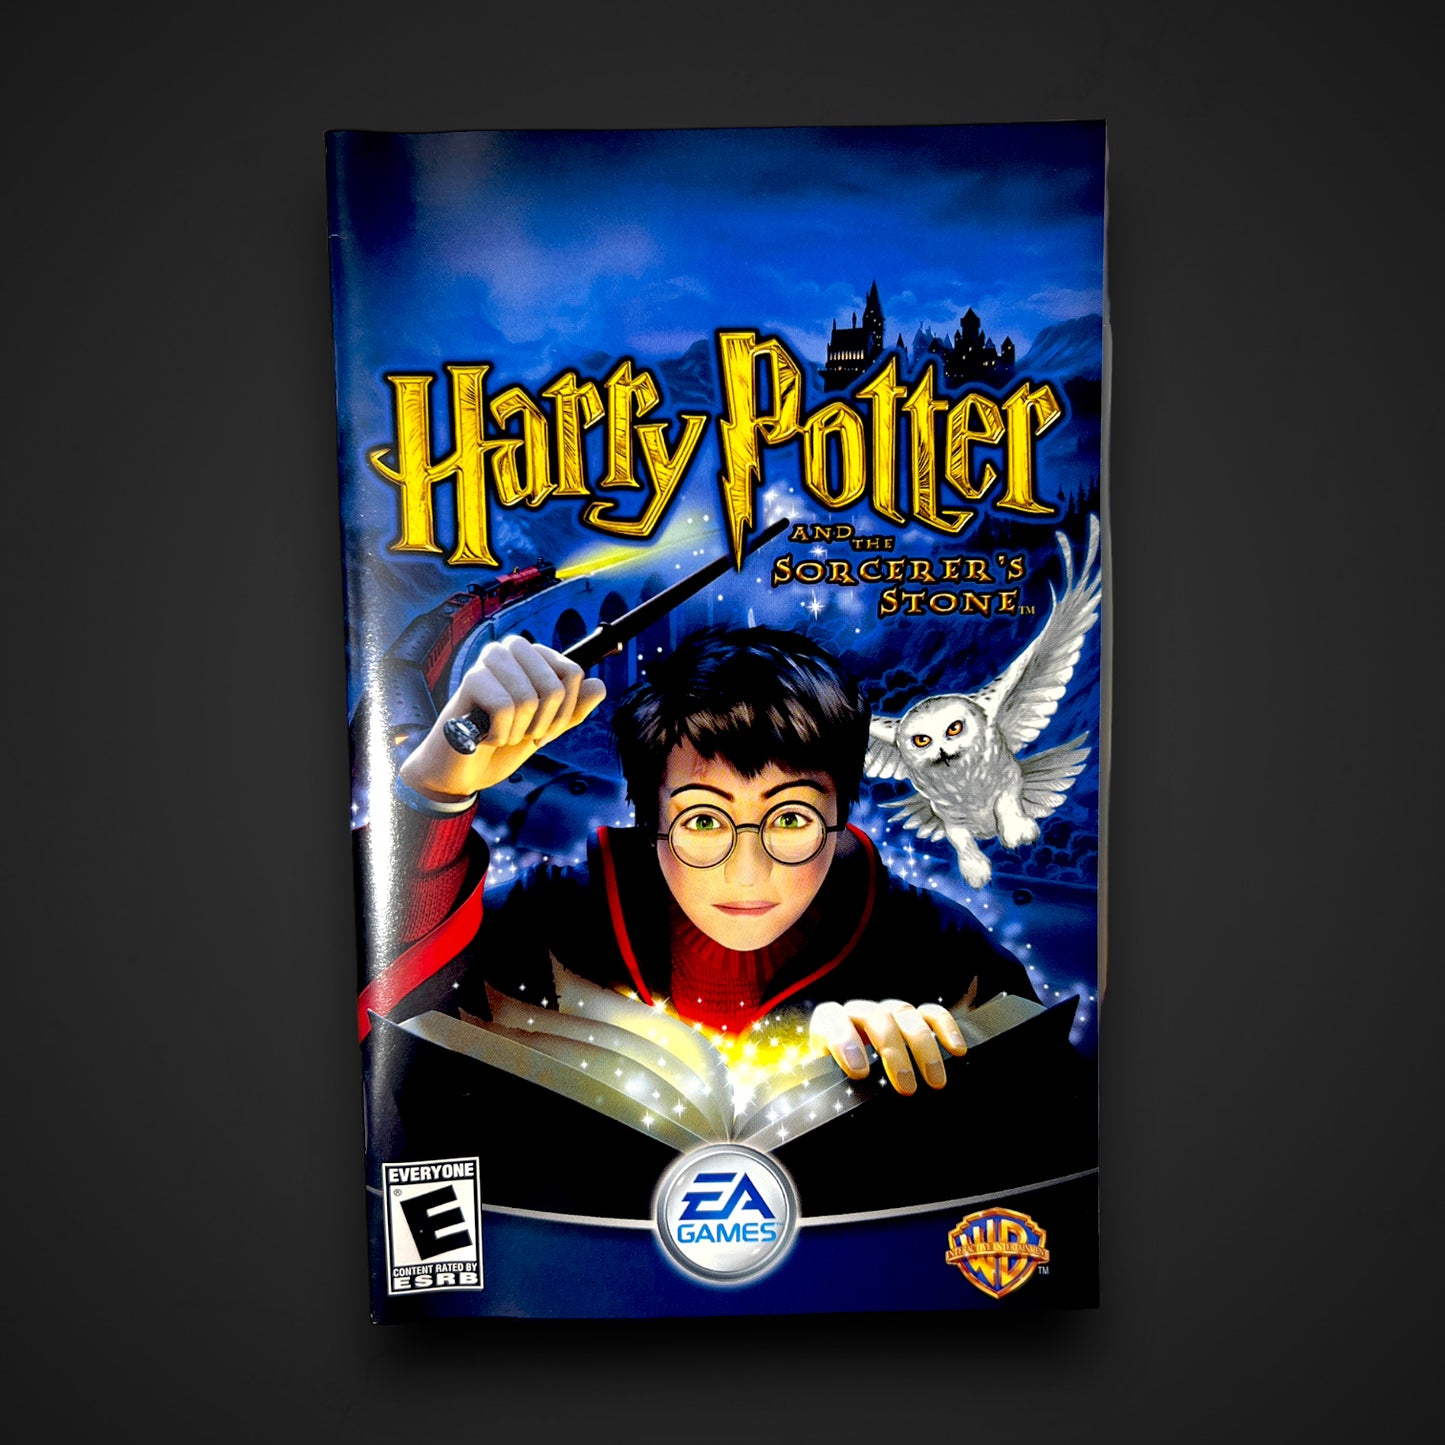 Harry Potter and the Sorcerer's Stone (Sony PlayStation 2, 2003)